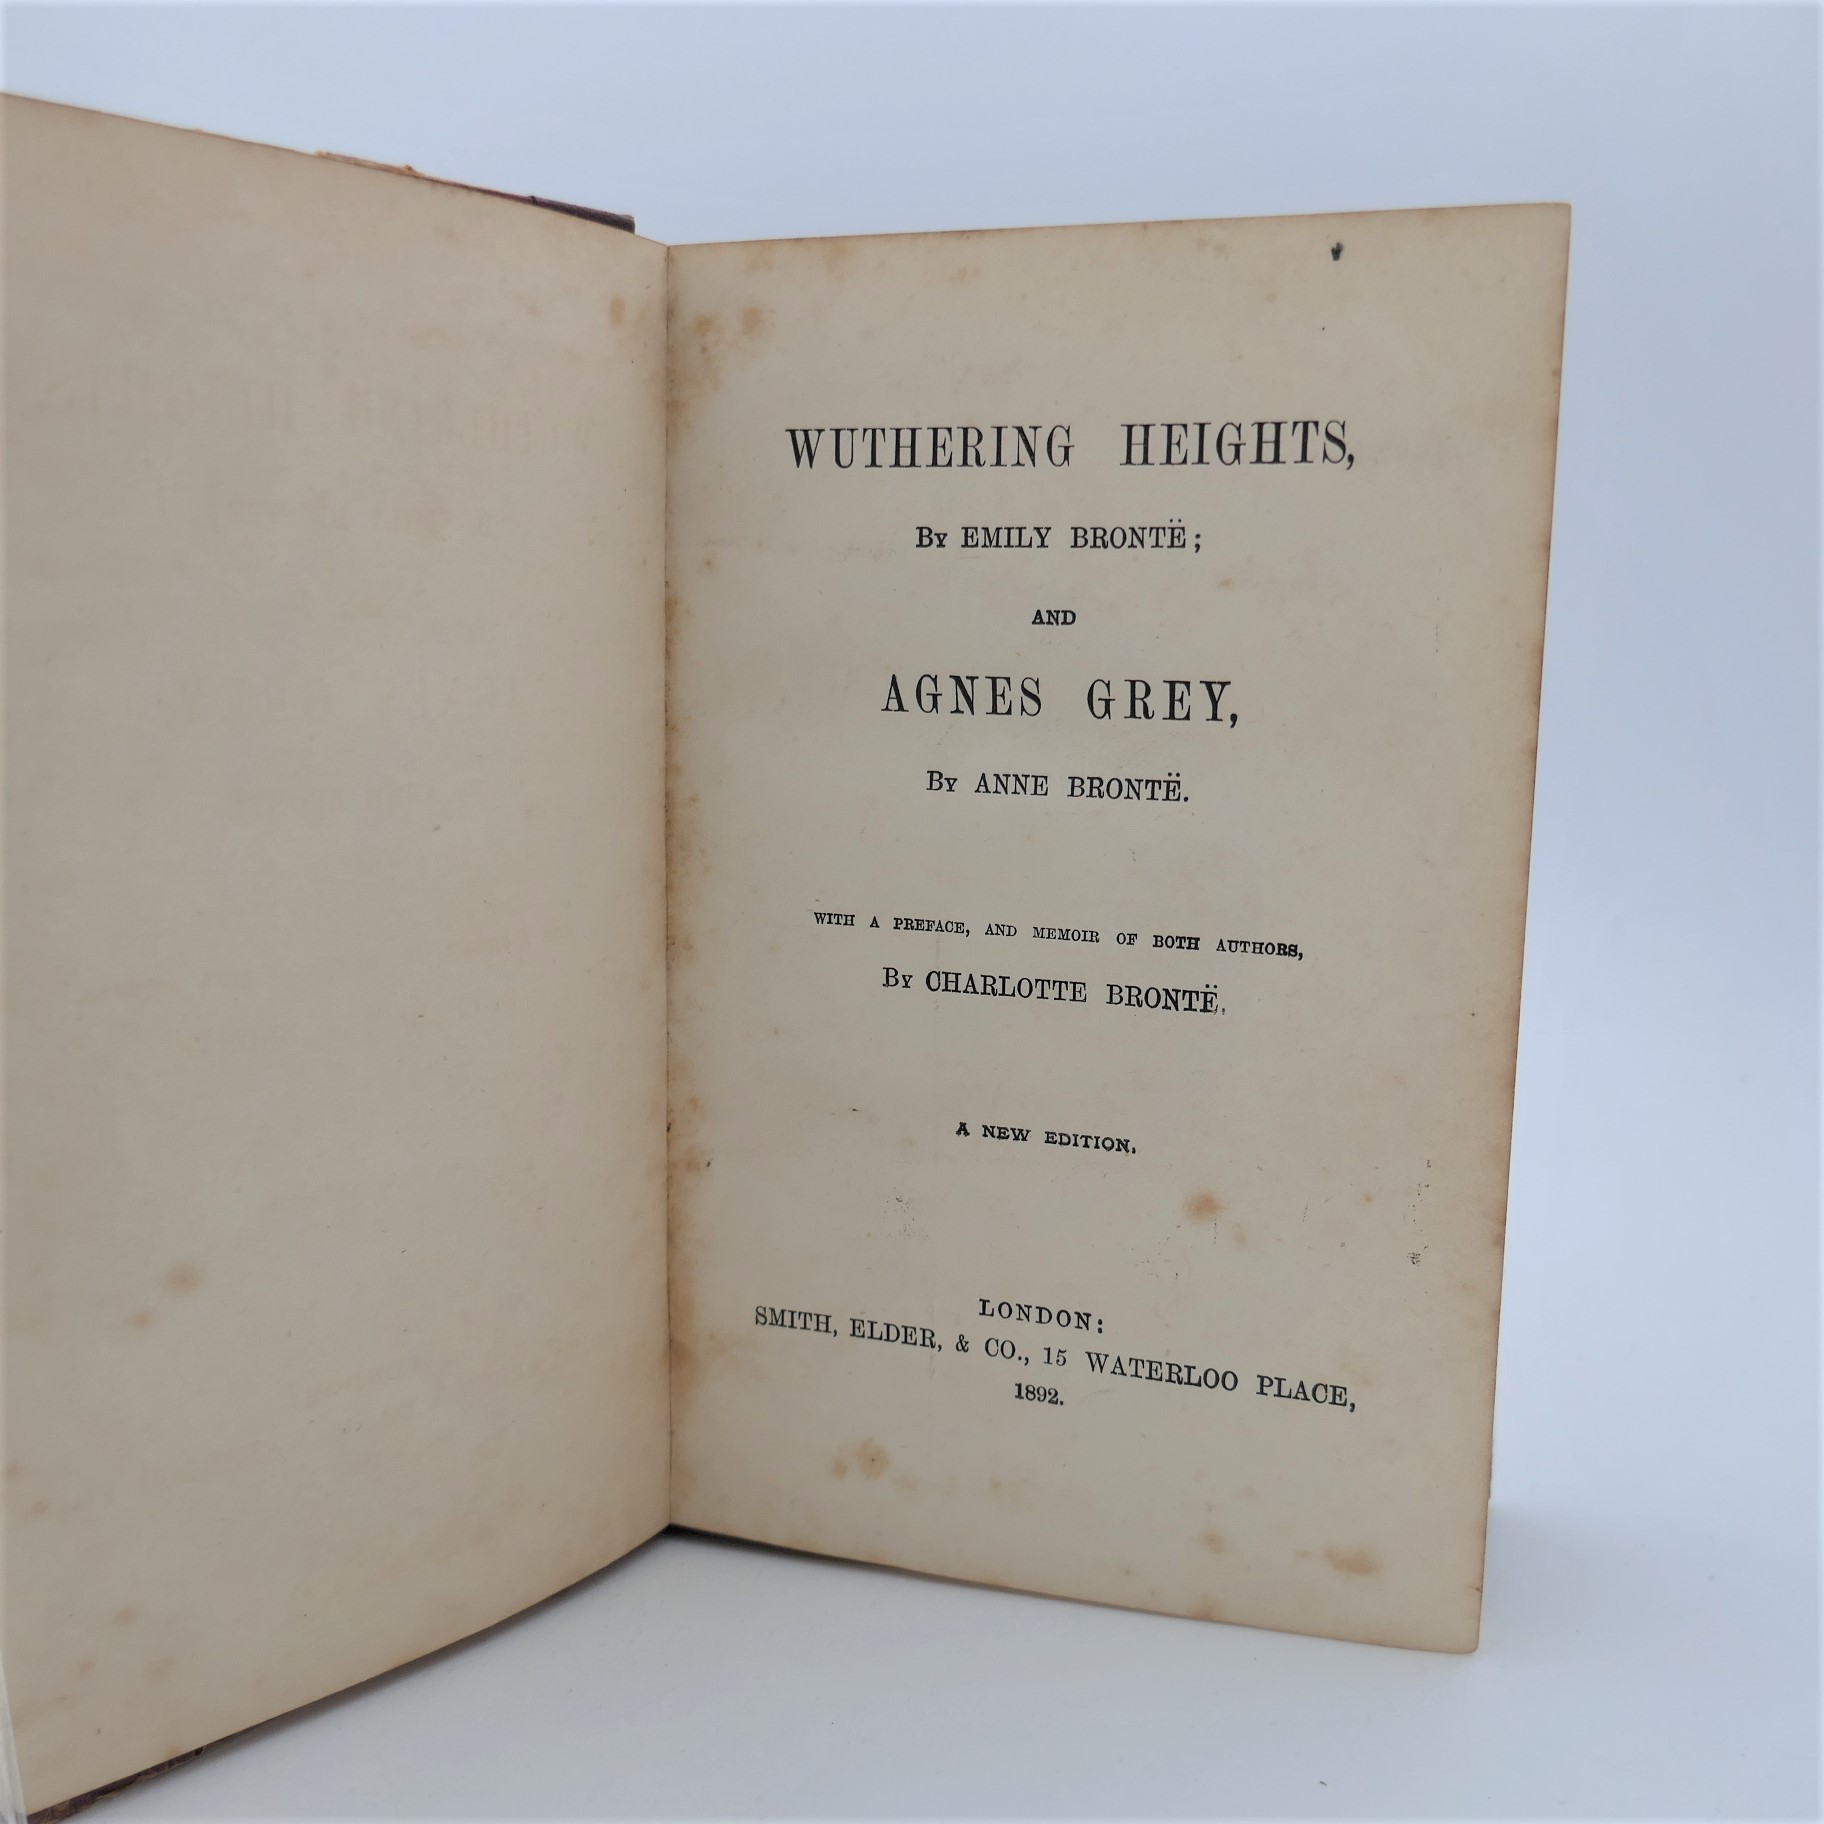 Wuthering Heights & Agnes Grey (1892) - Ulysses Rare Books